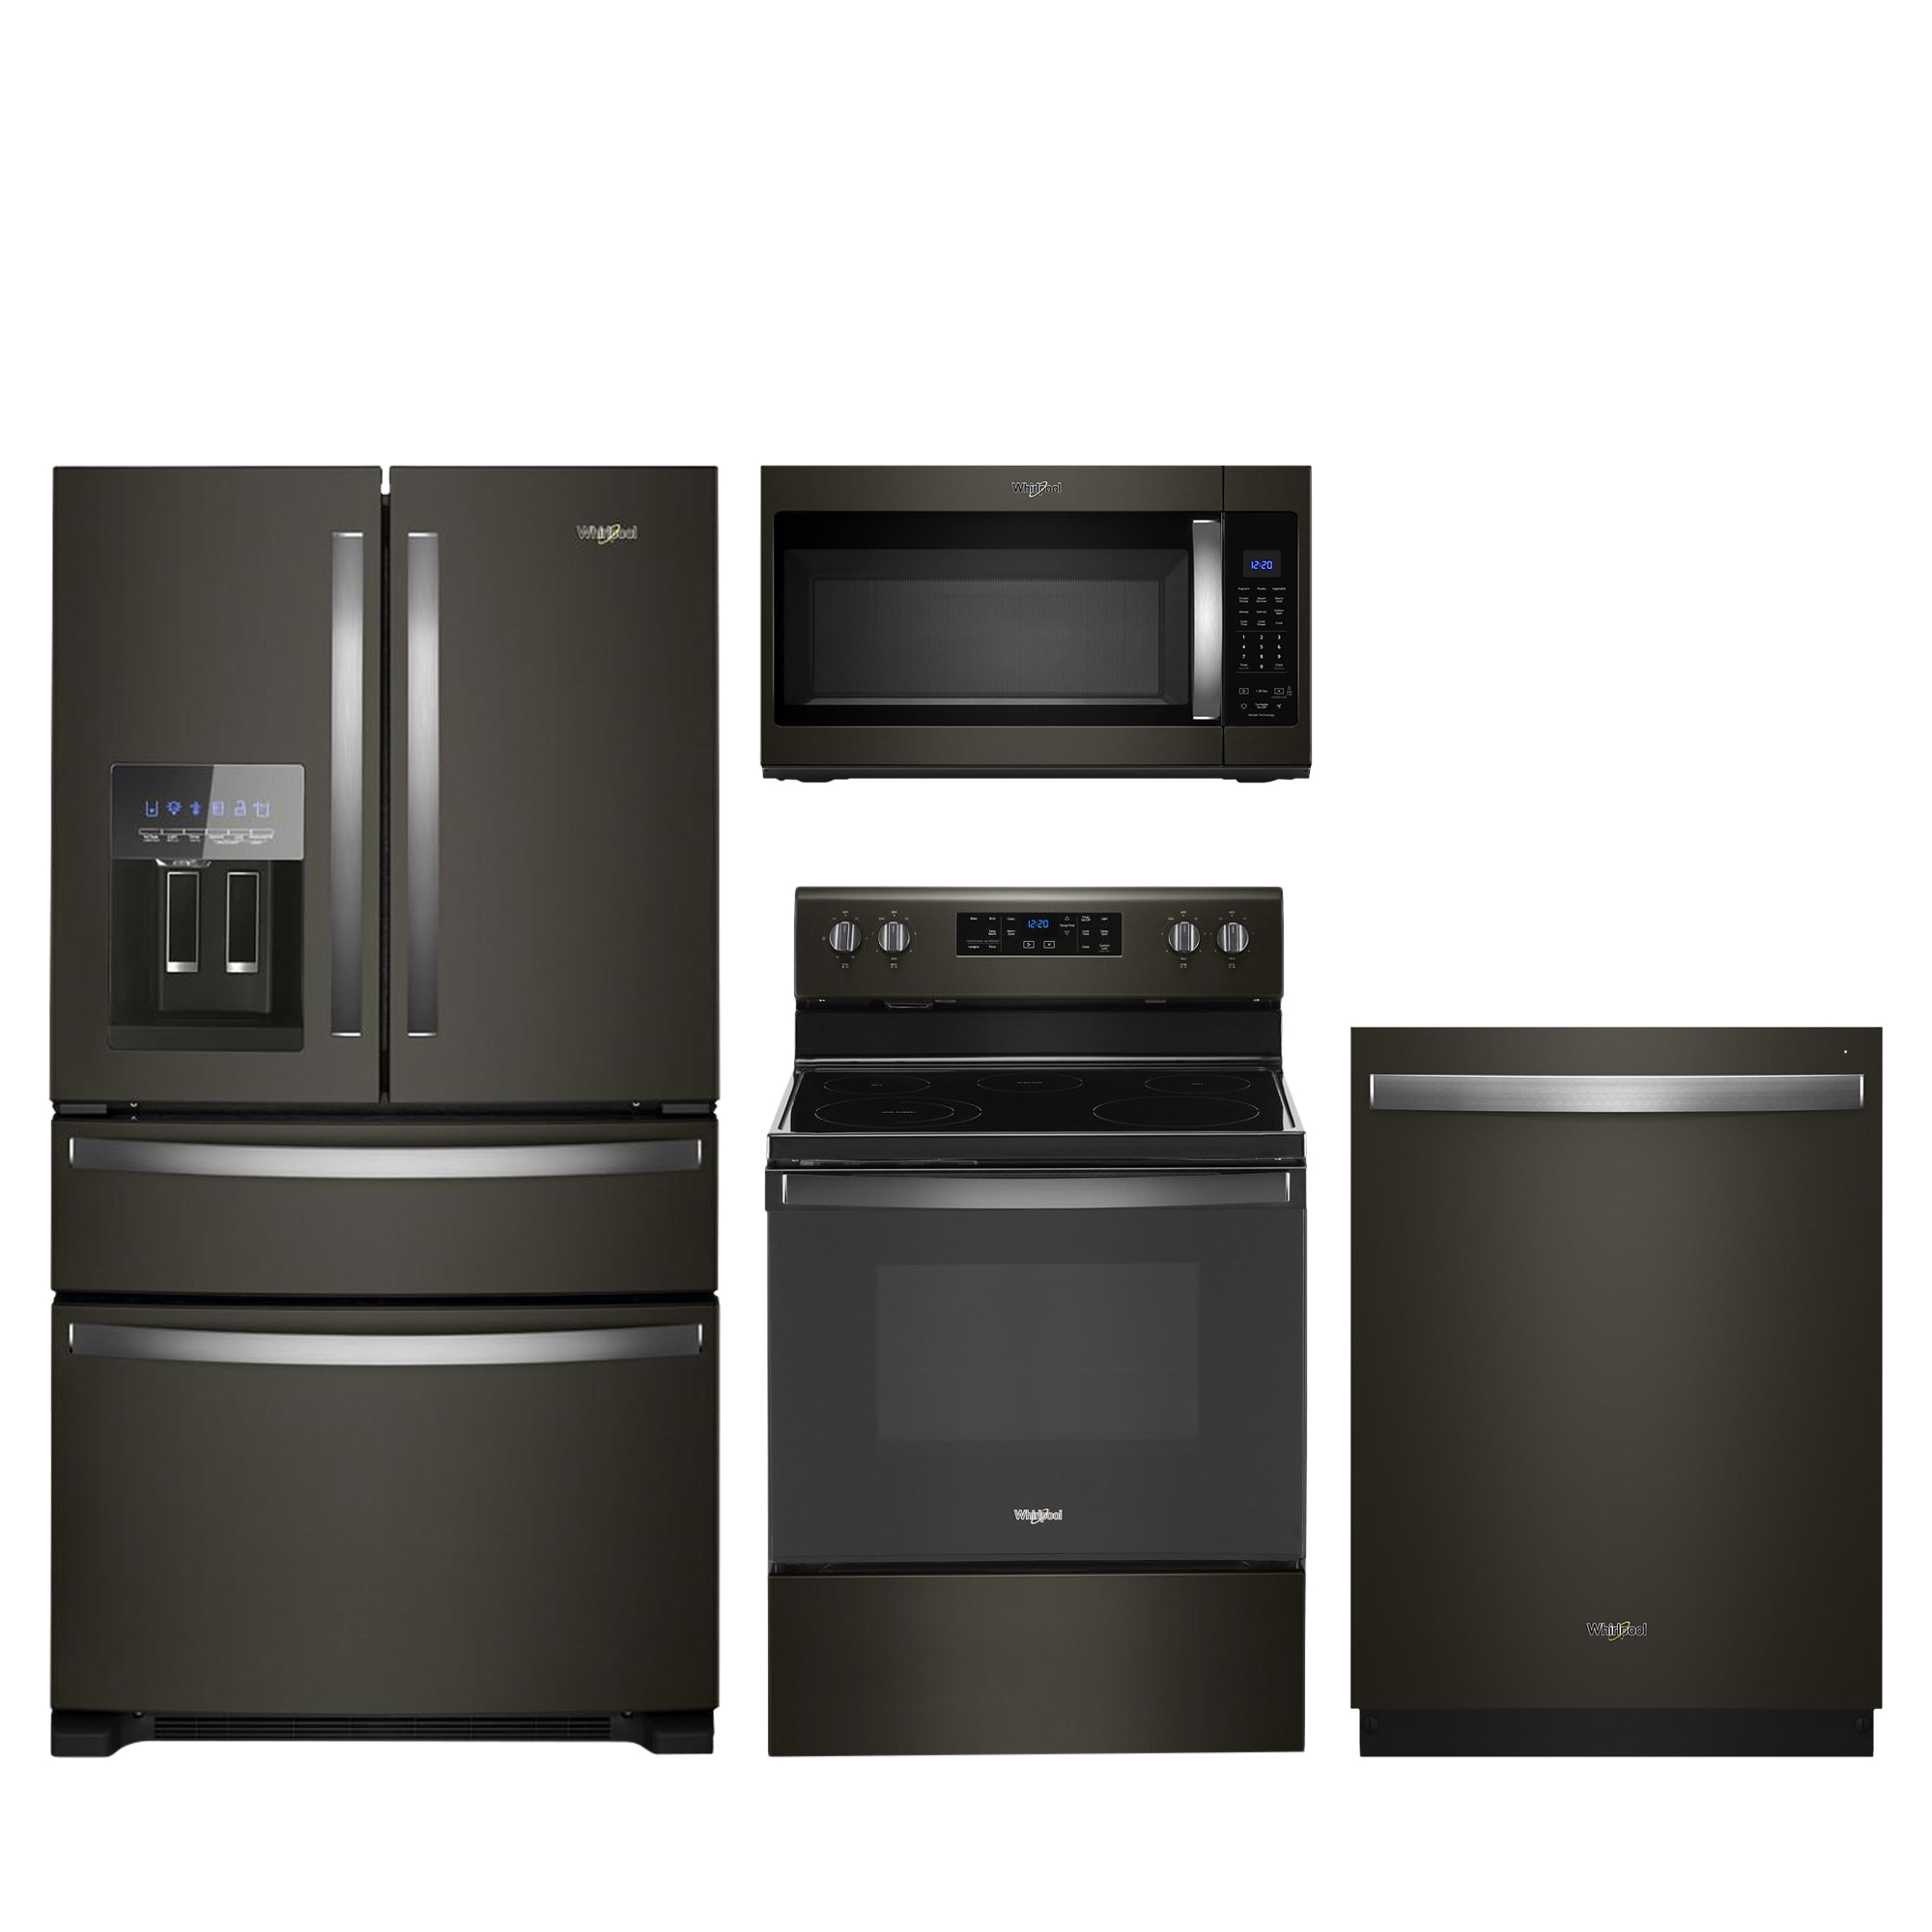 Whirlpool Black stainless steel Kitchen Appliance Packages at